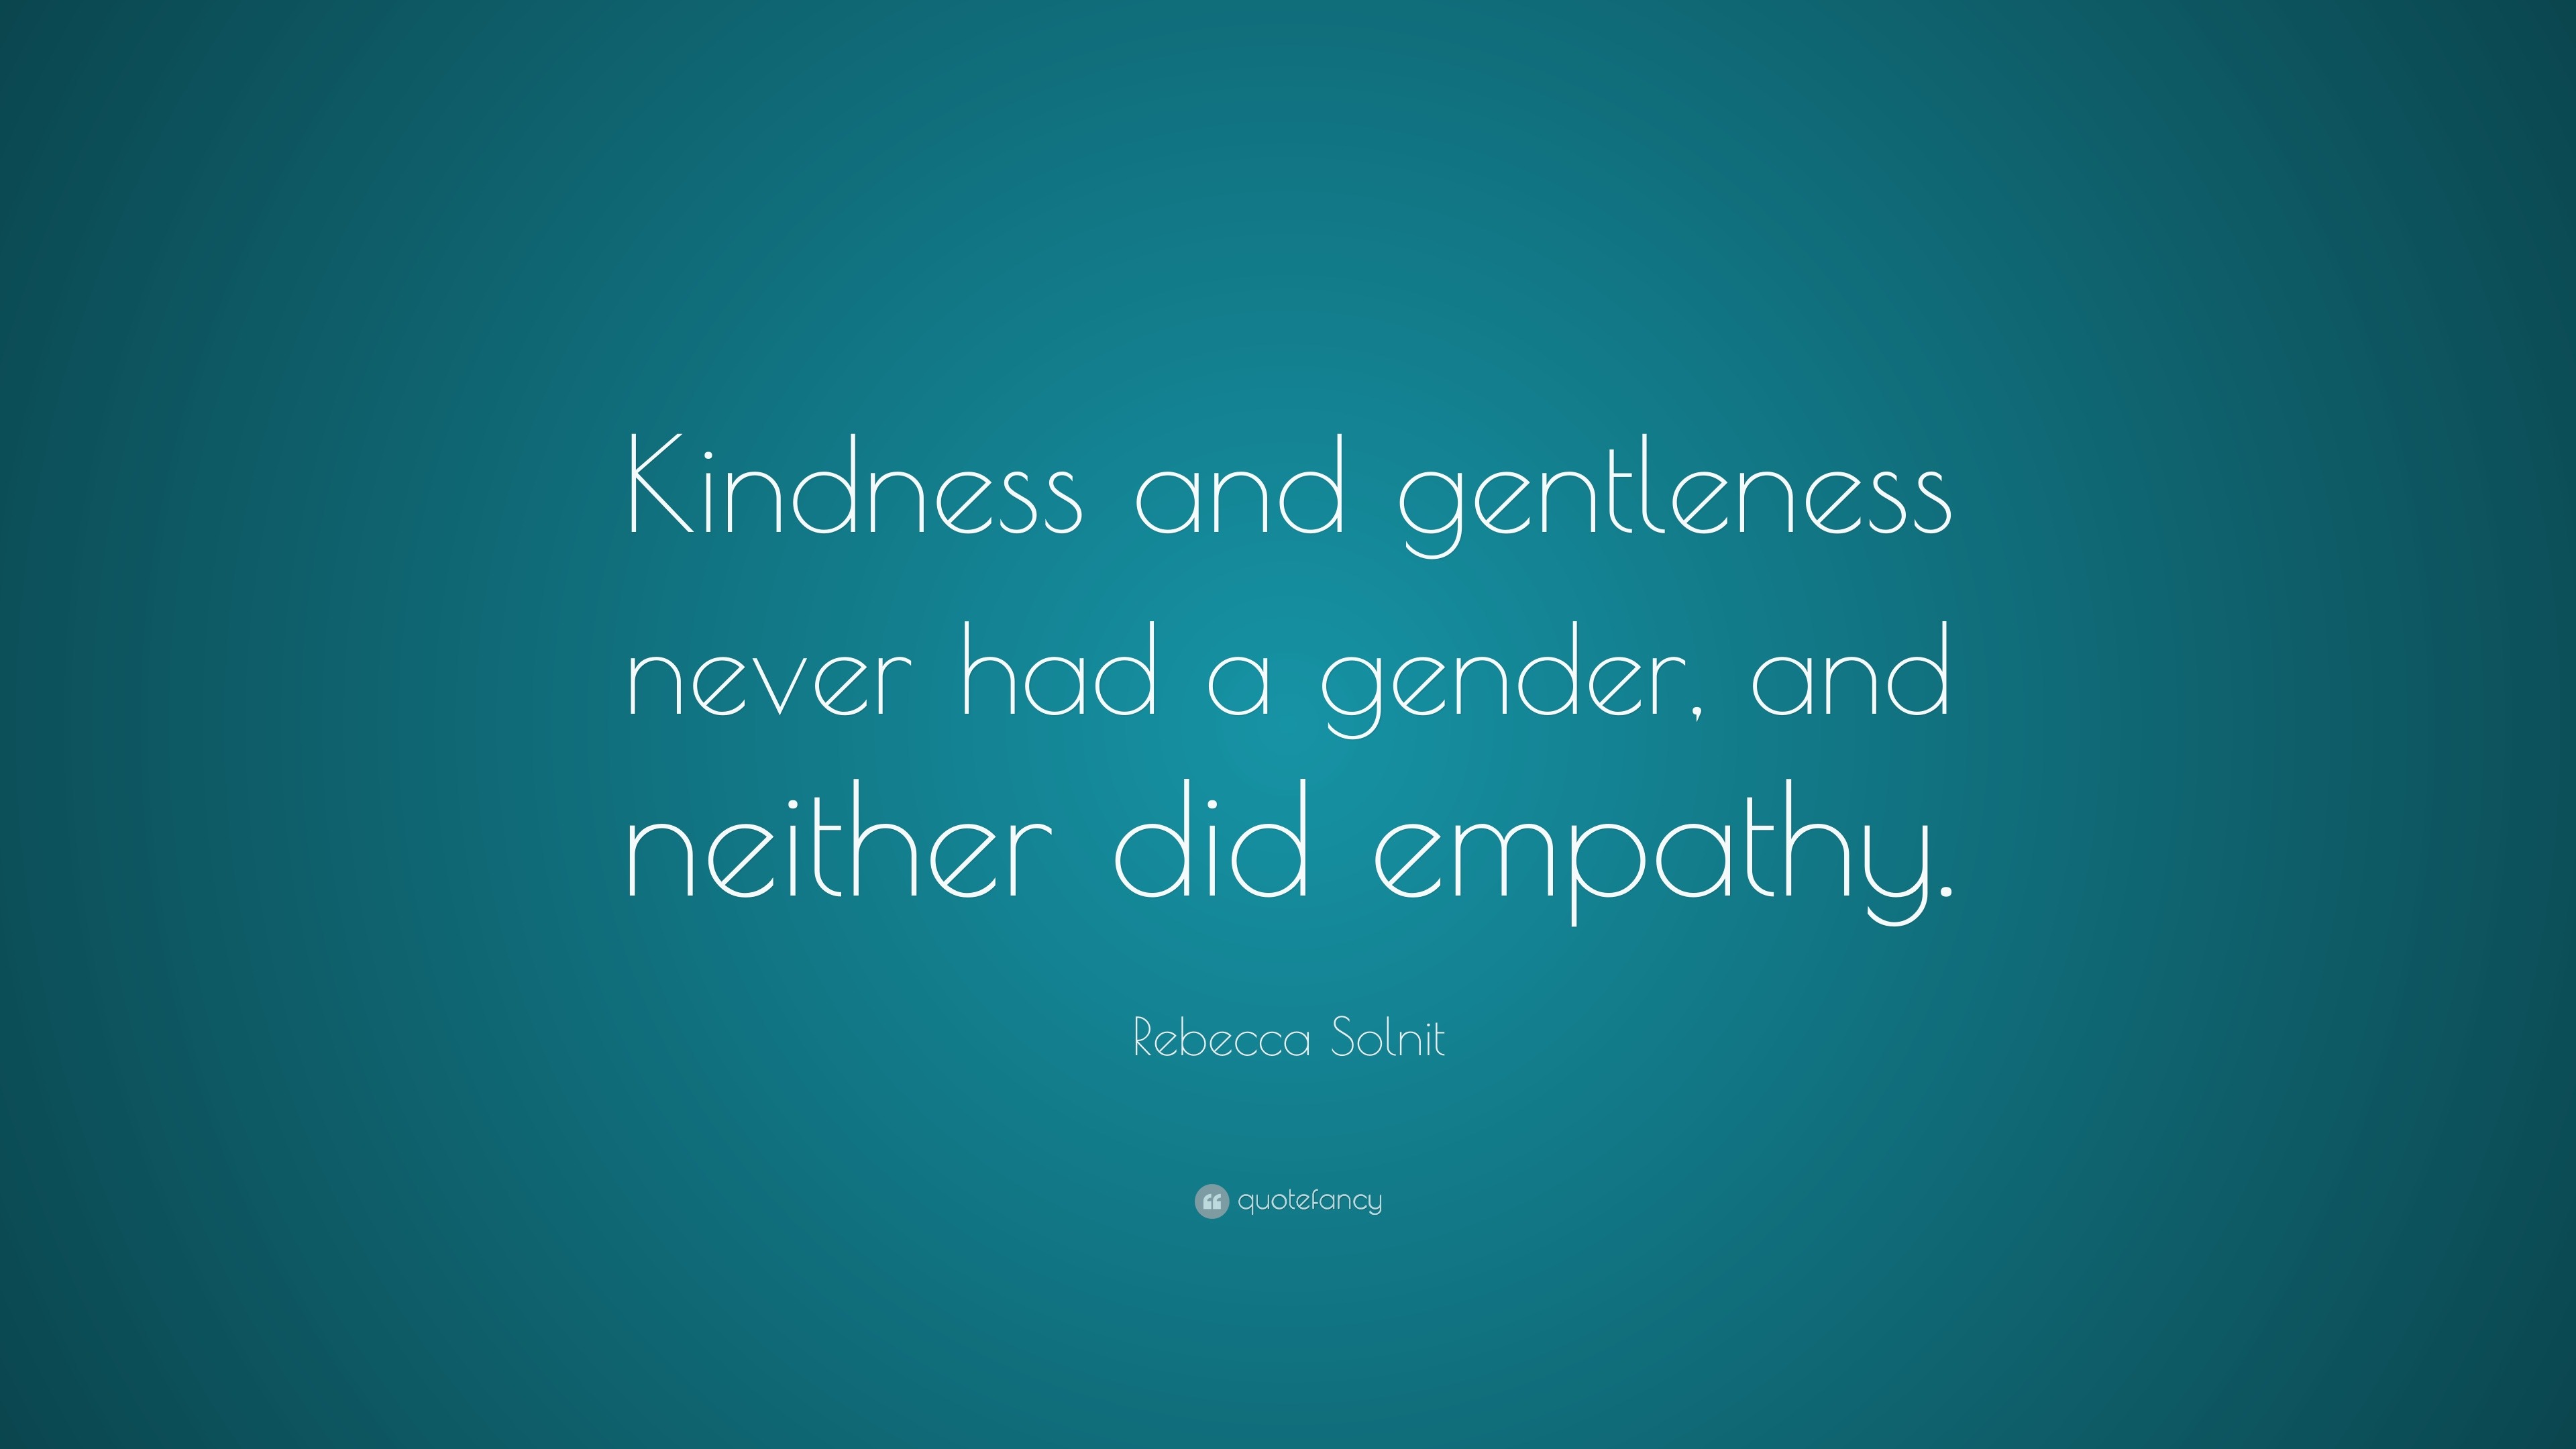 Rebecca Solnit Quote: “Kindness and gentleness never had a gender, and ...